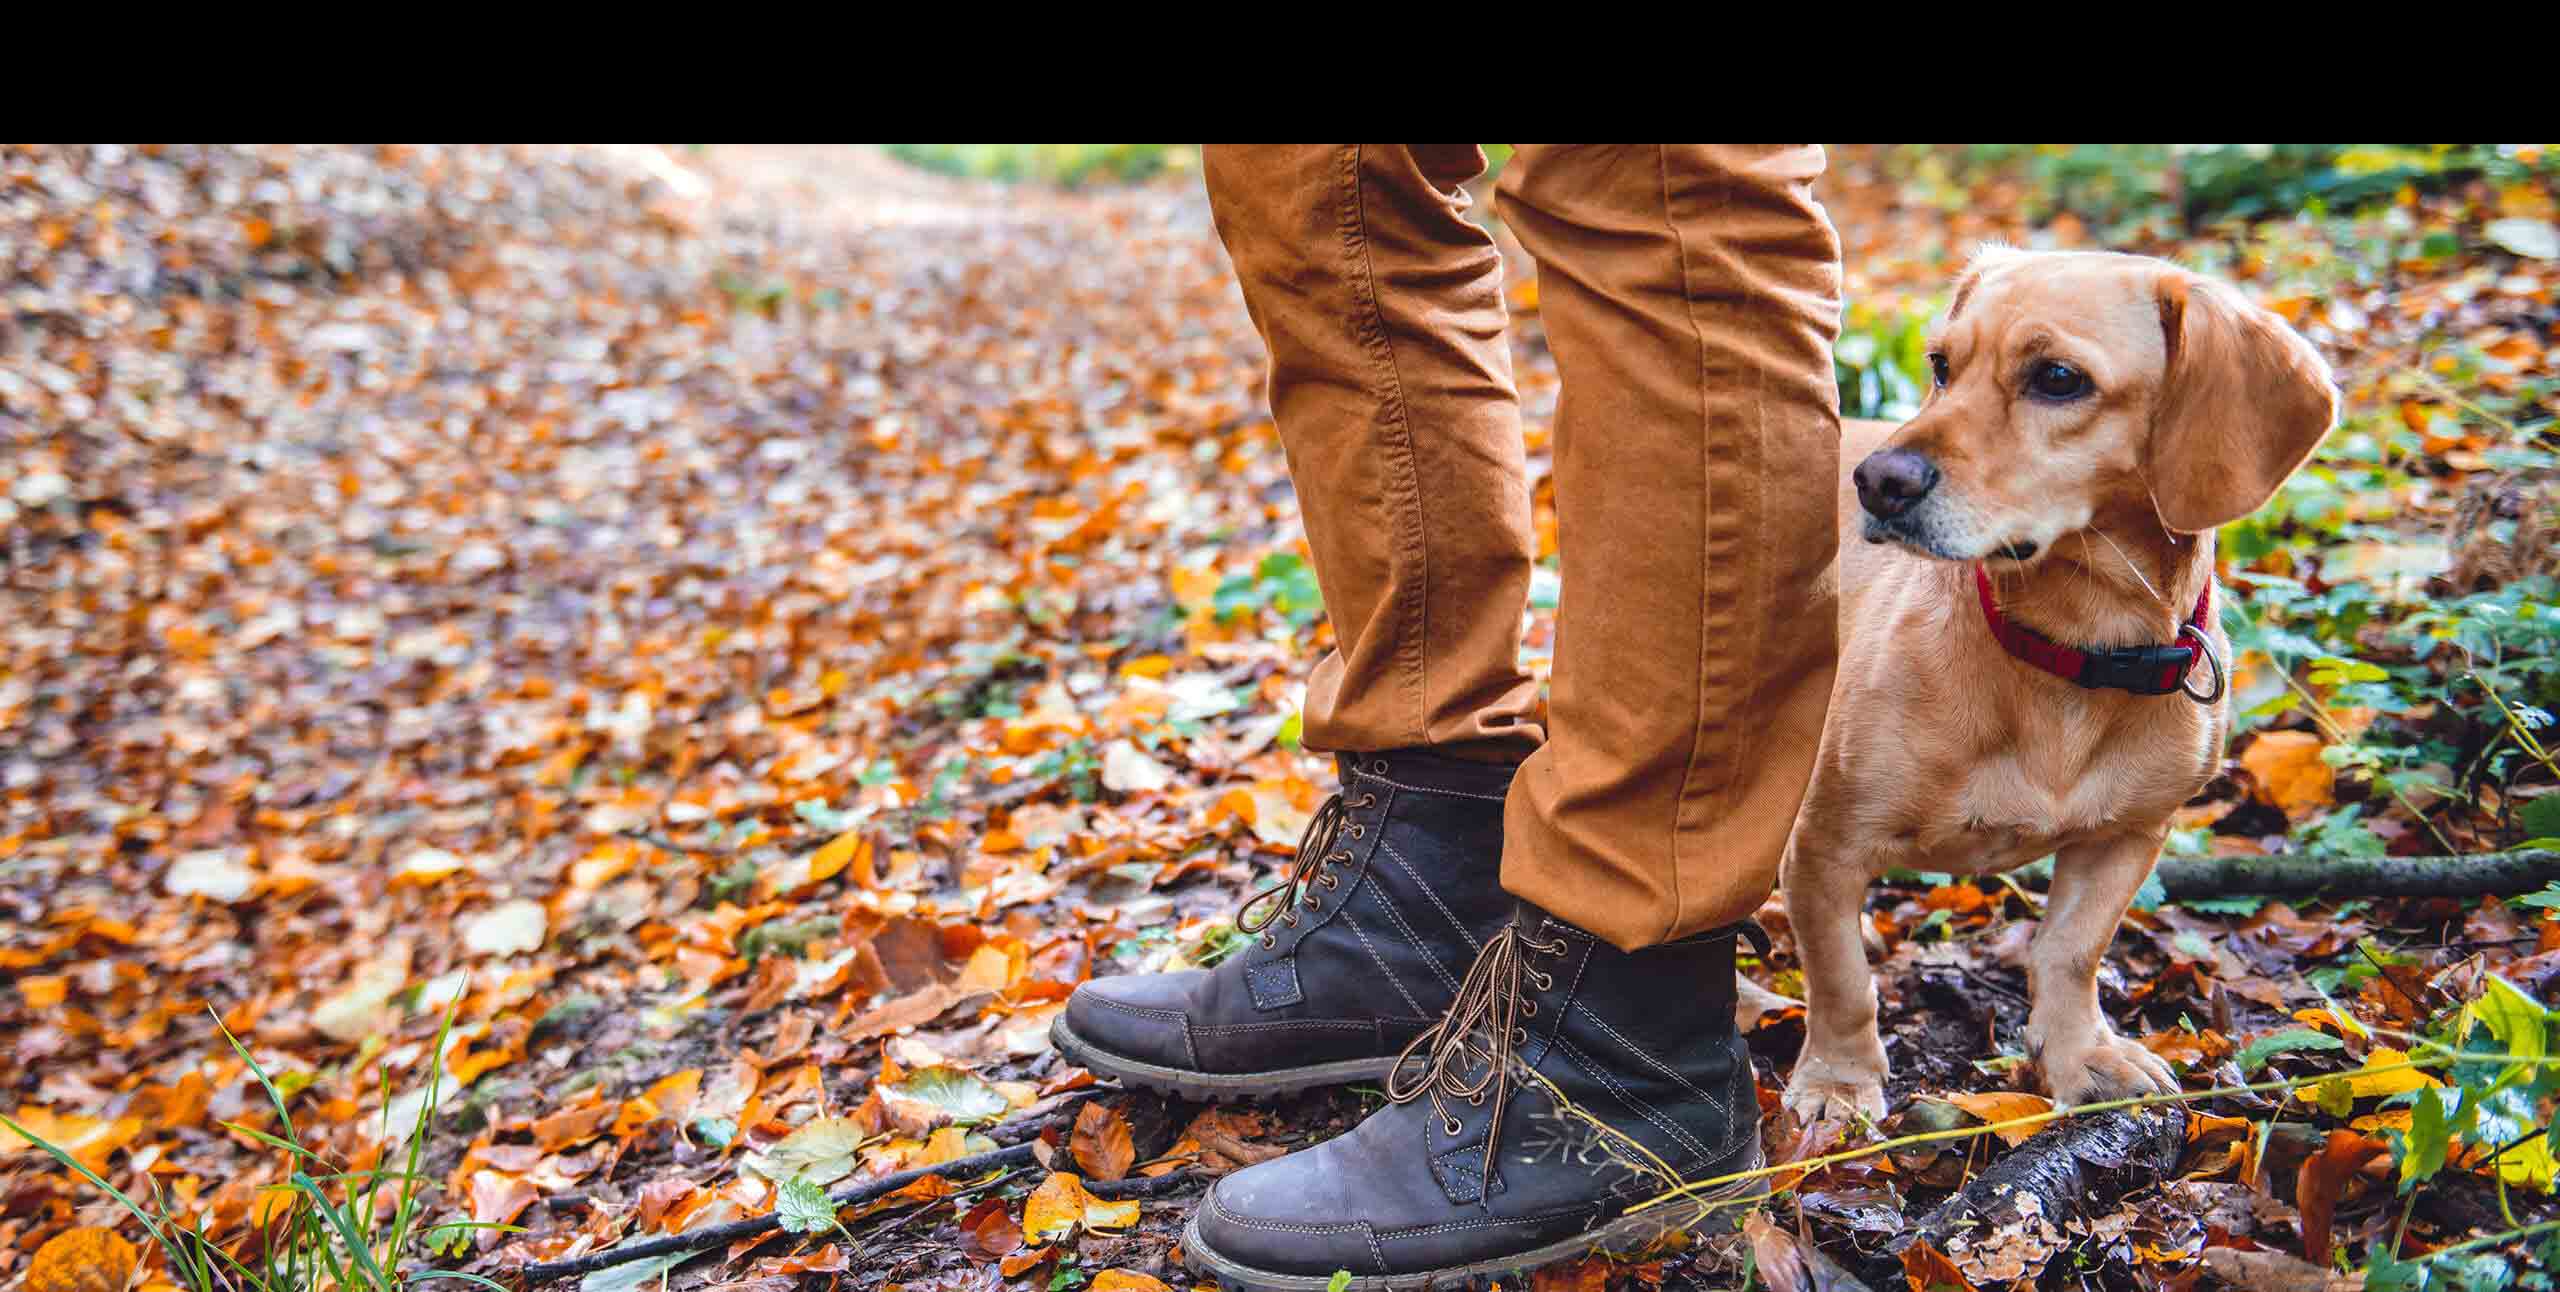 dog standing behind owner on a forest trail